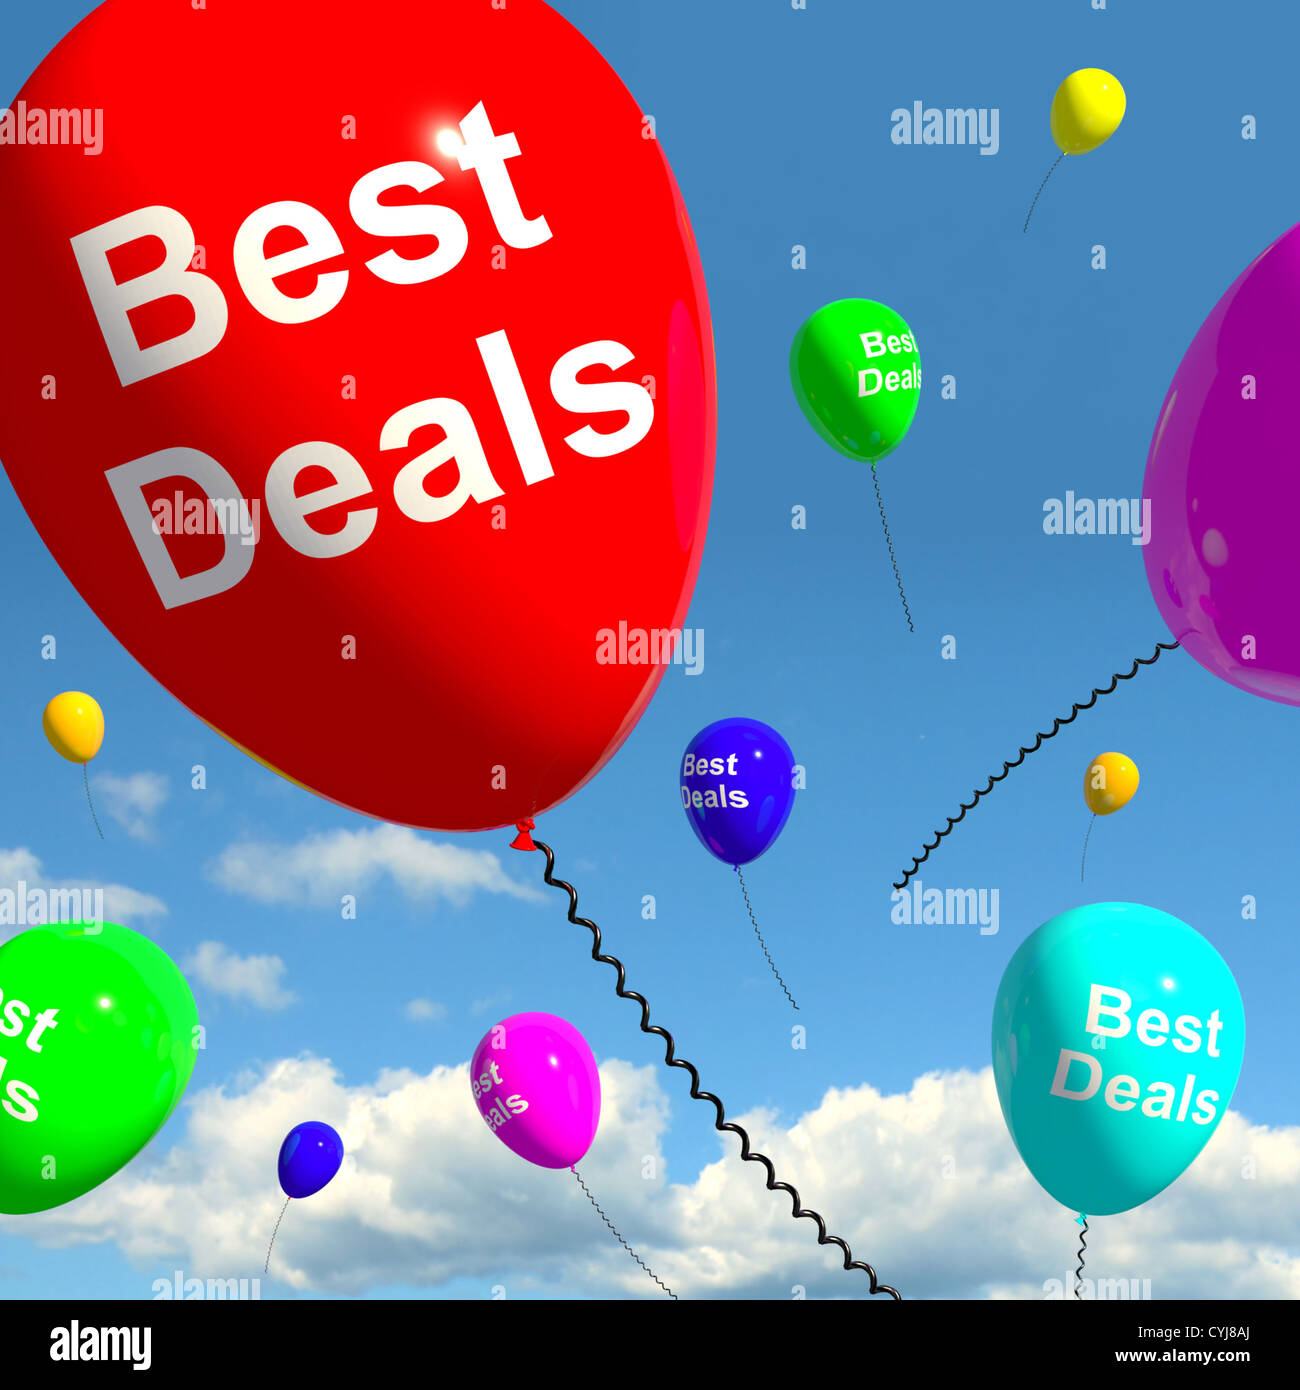 Best Deals Balloons Represents Bargains Or Discounts Stock Photo